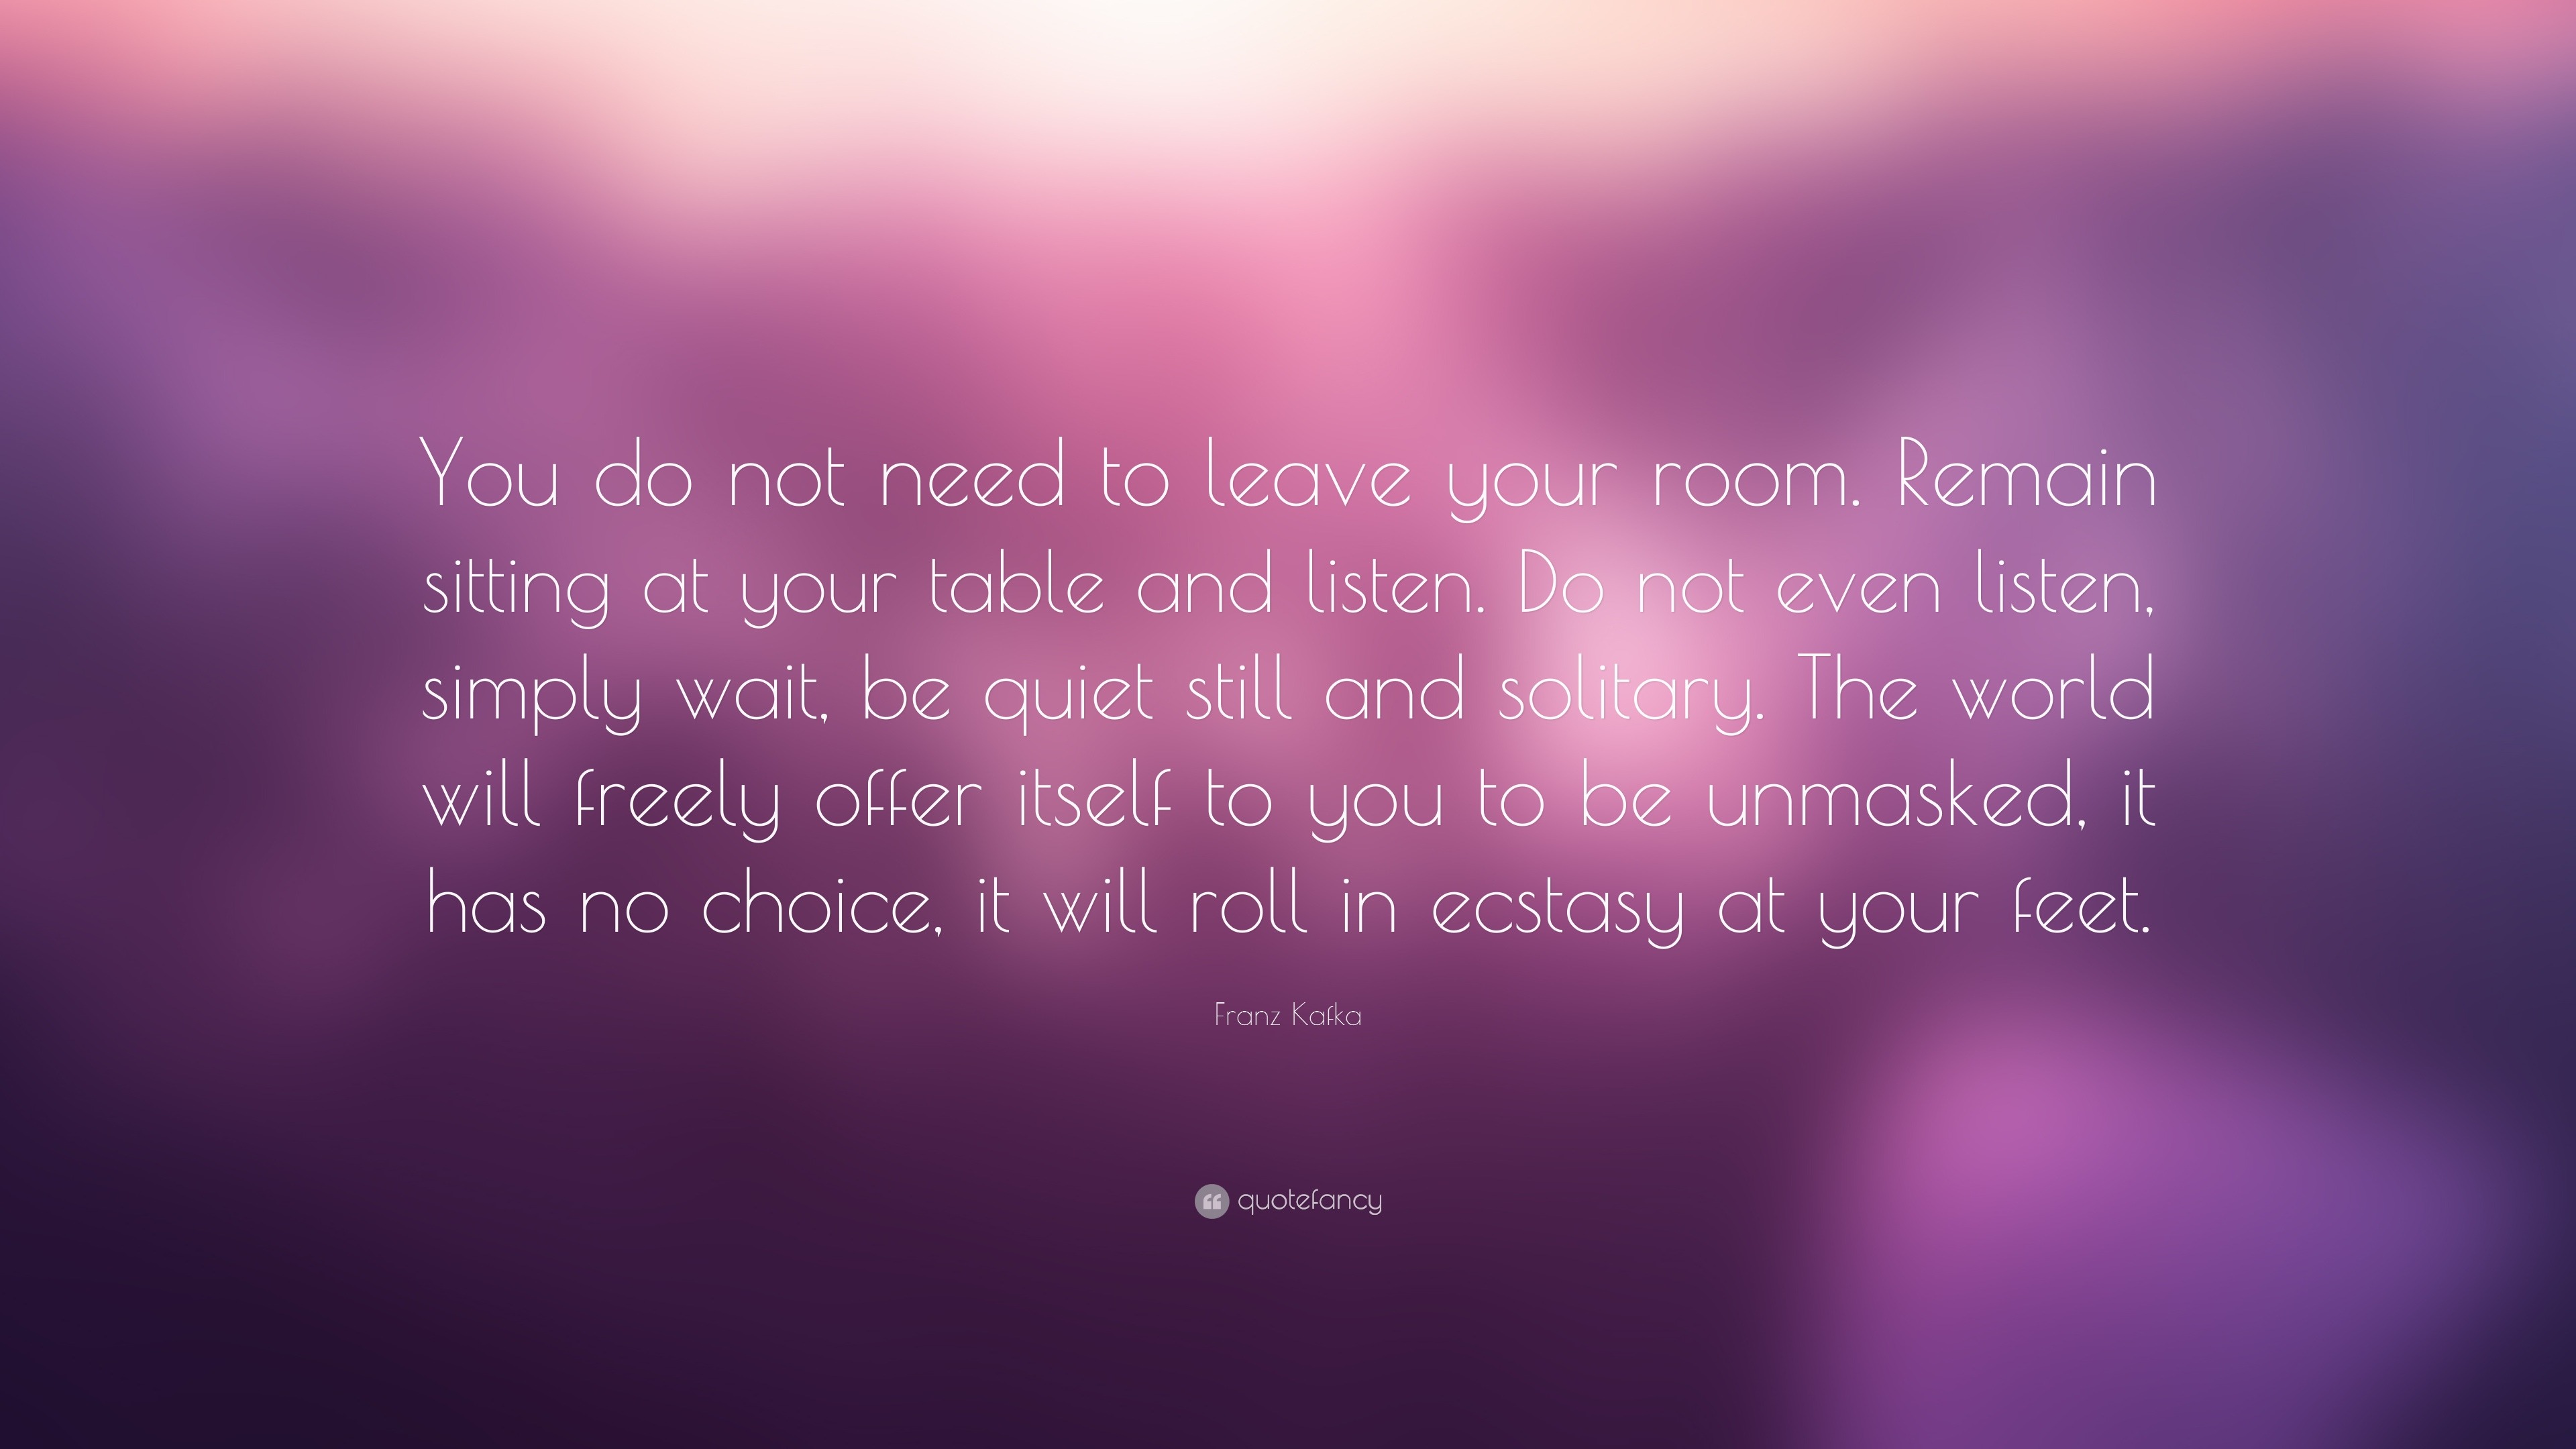 Franz Kafka Quote: “You do not need to leave your room. Remain sitting ...